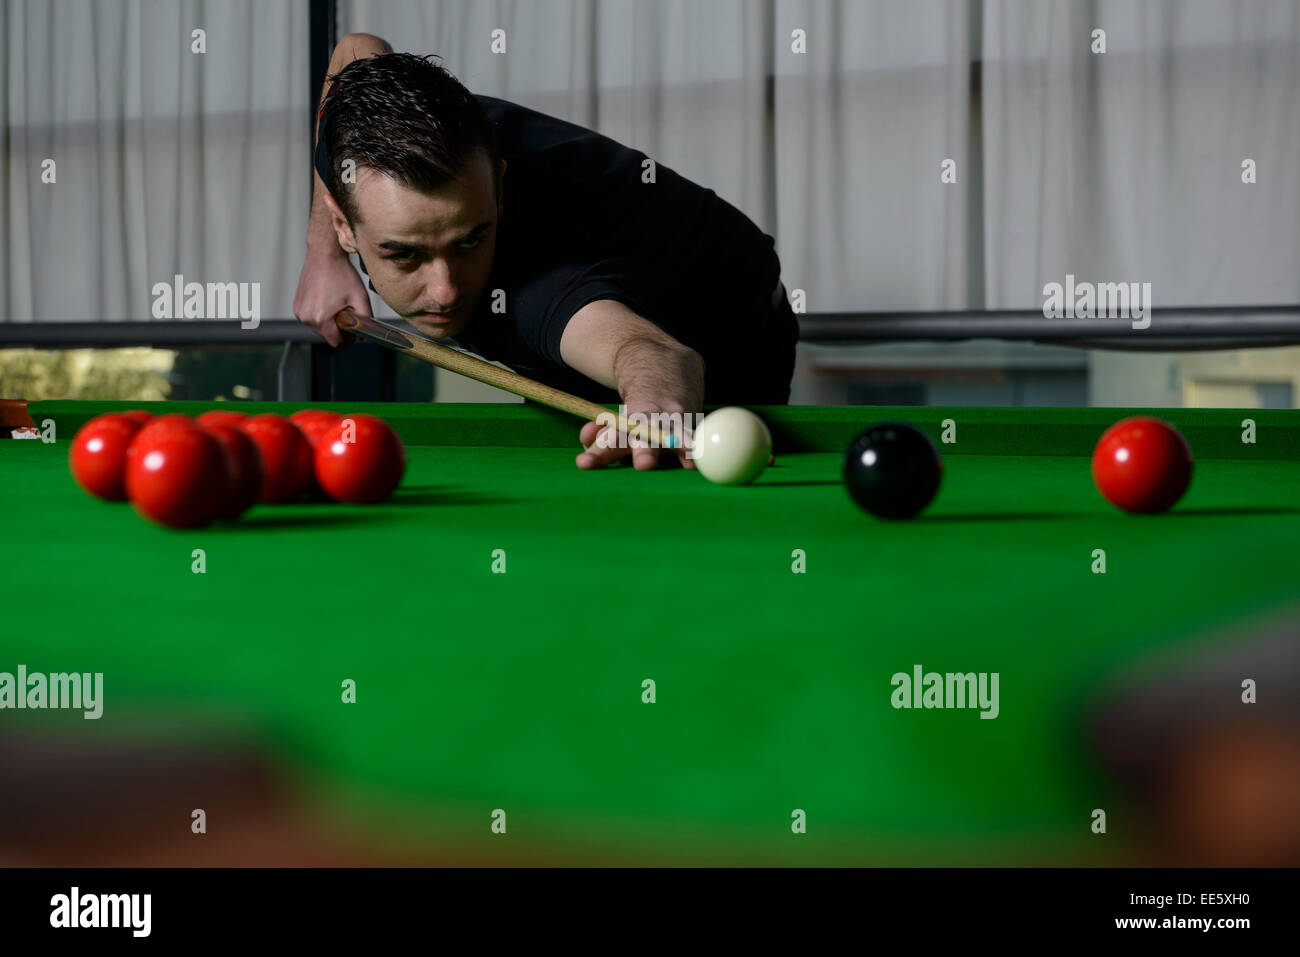 Young man playing snooker Stock Photo